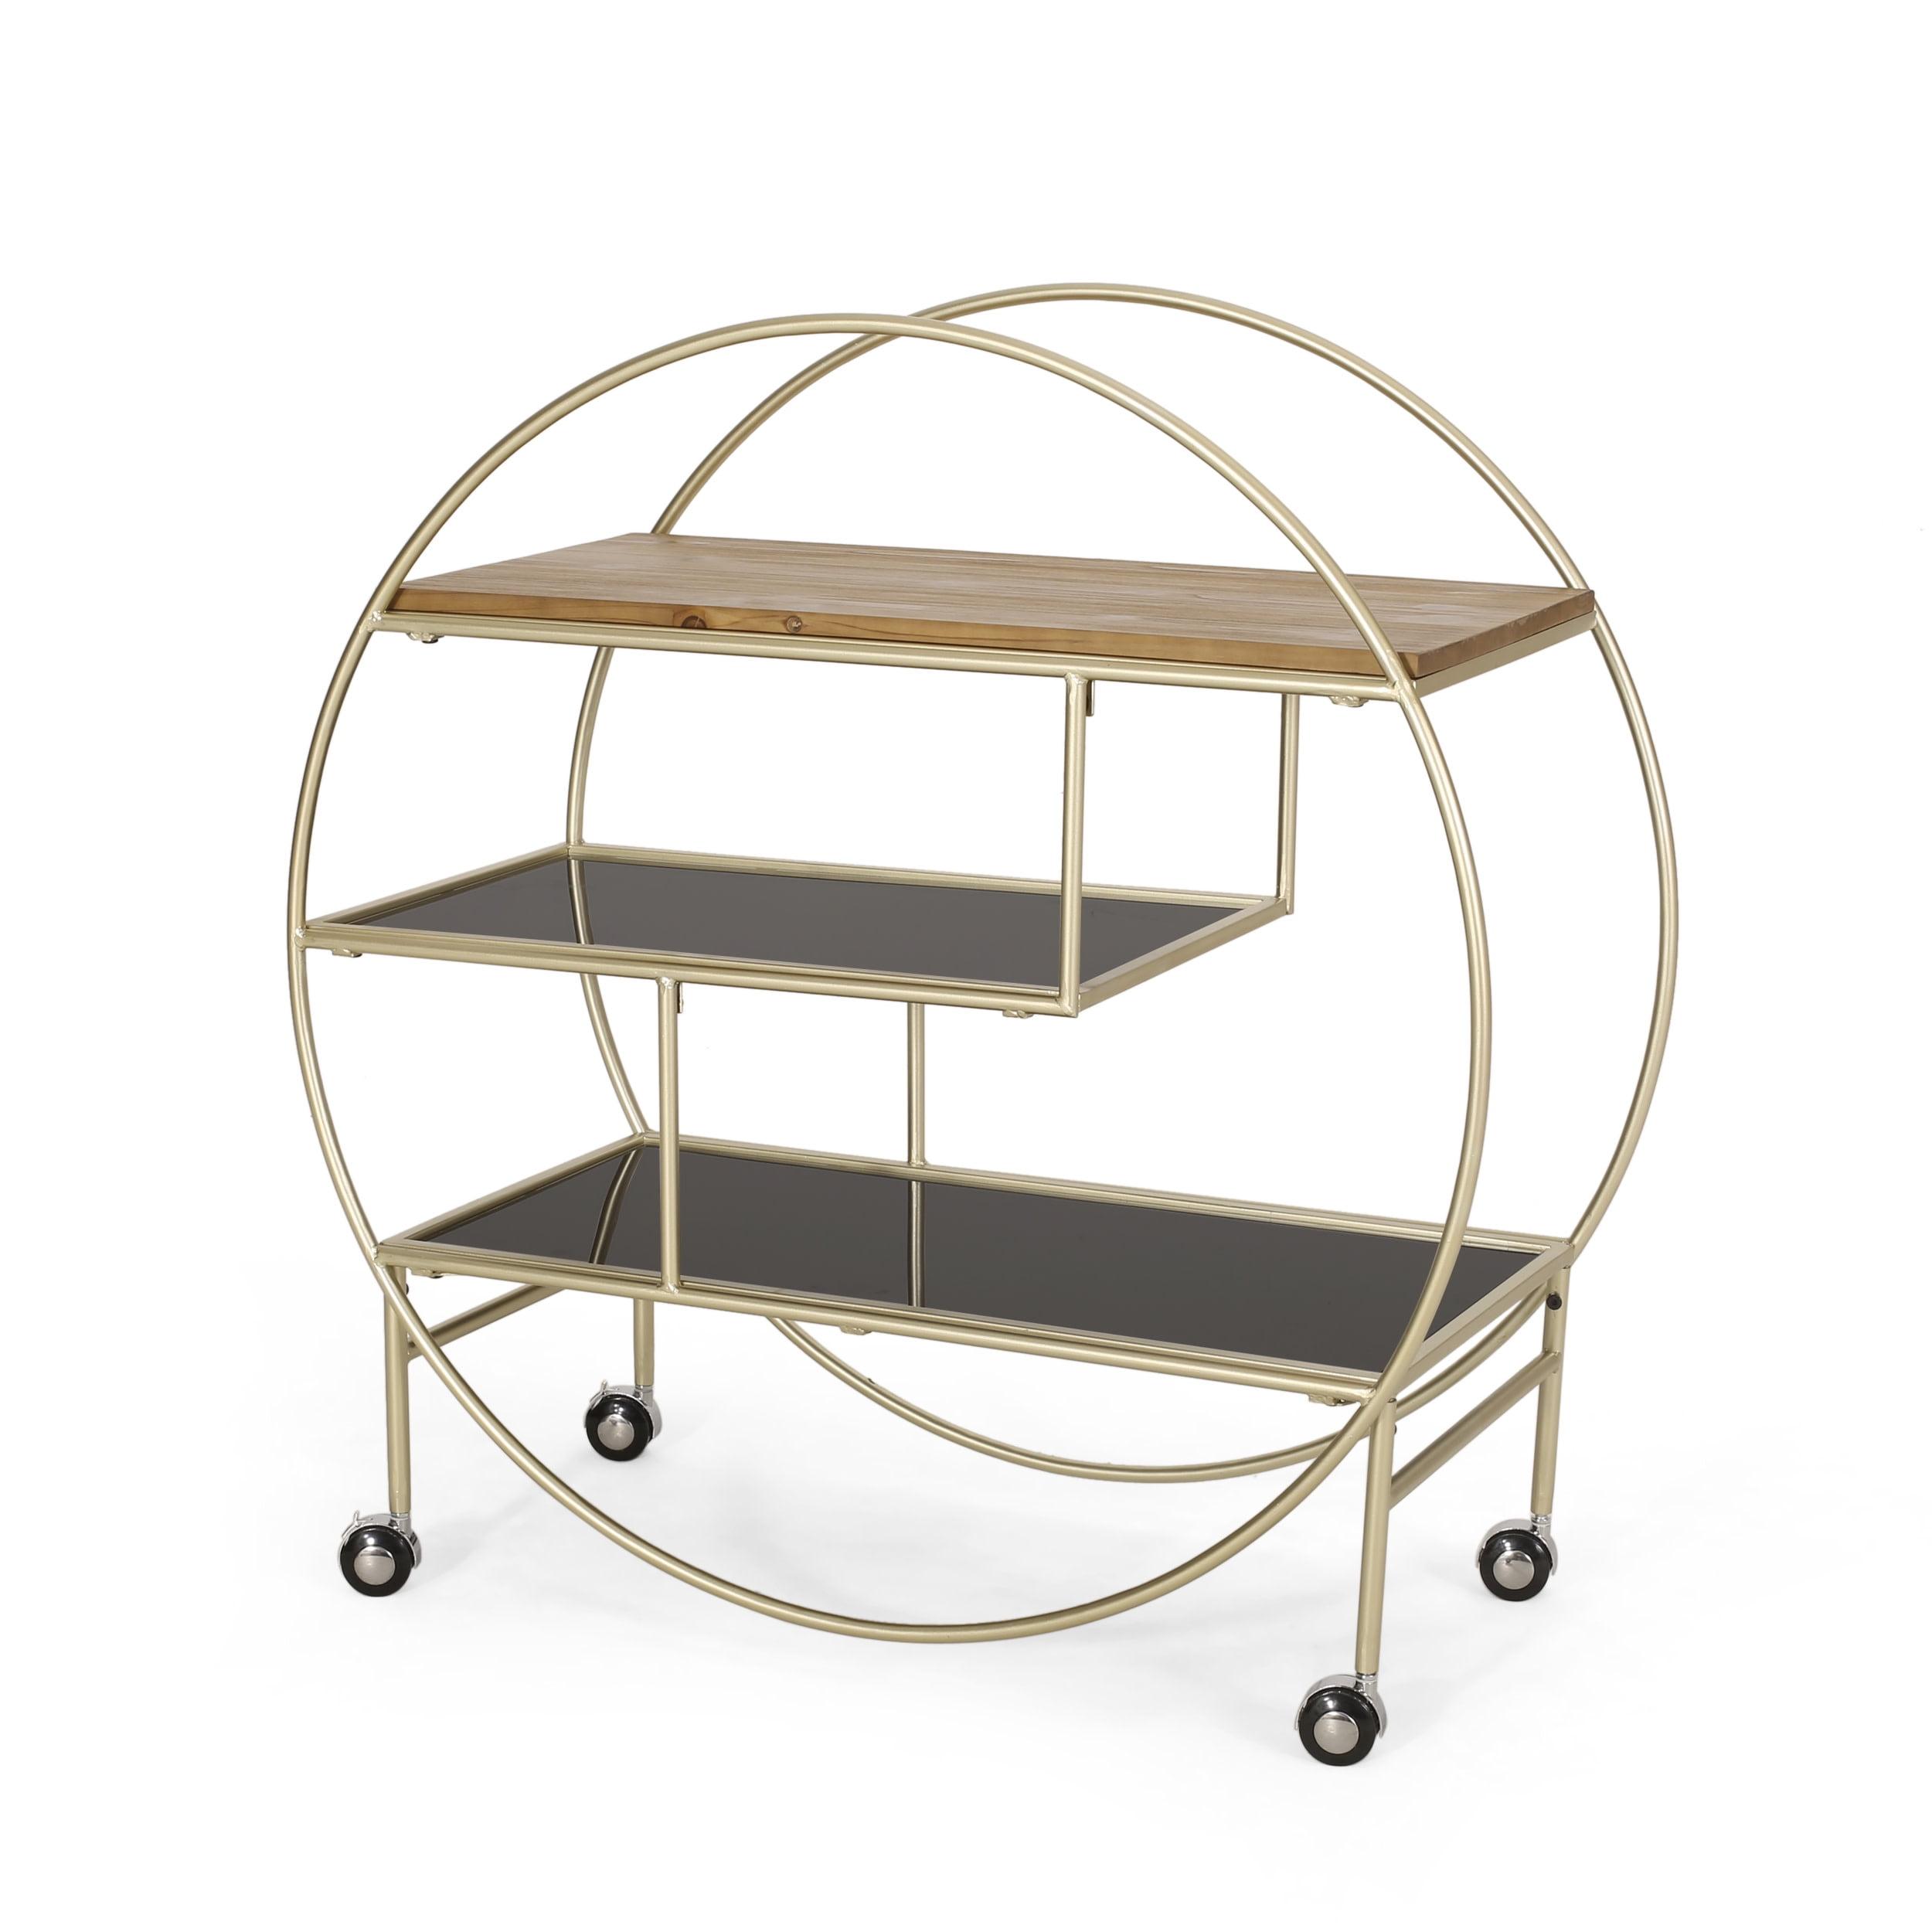 Elegant Circular Black and Gold Bookcase with Tempered Glass Shelves